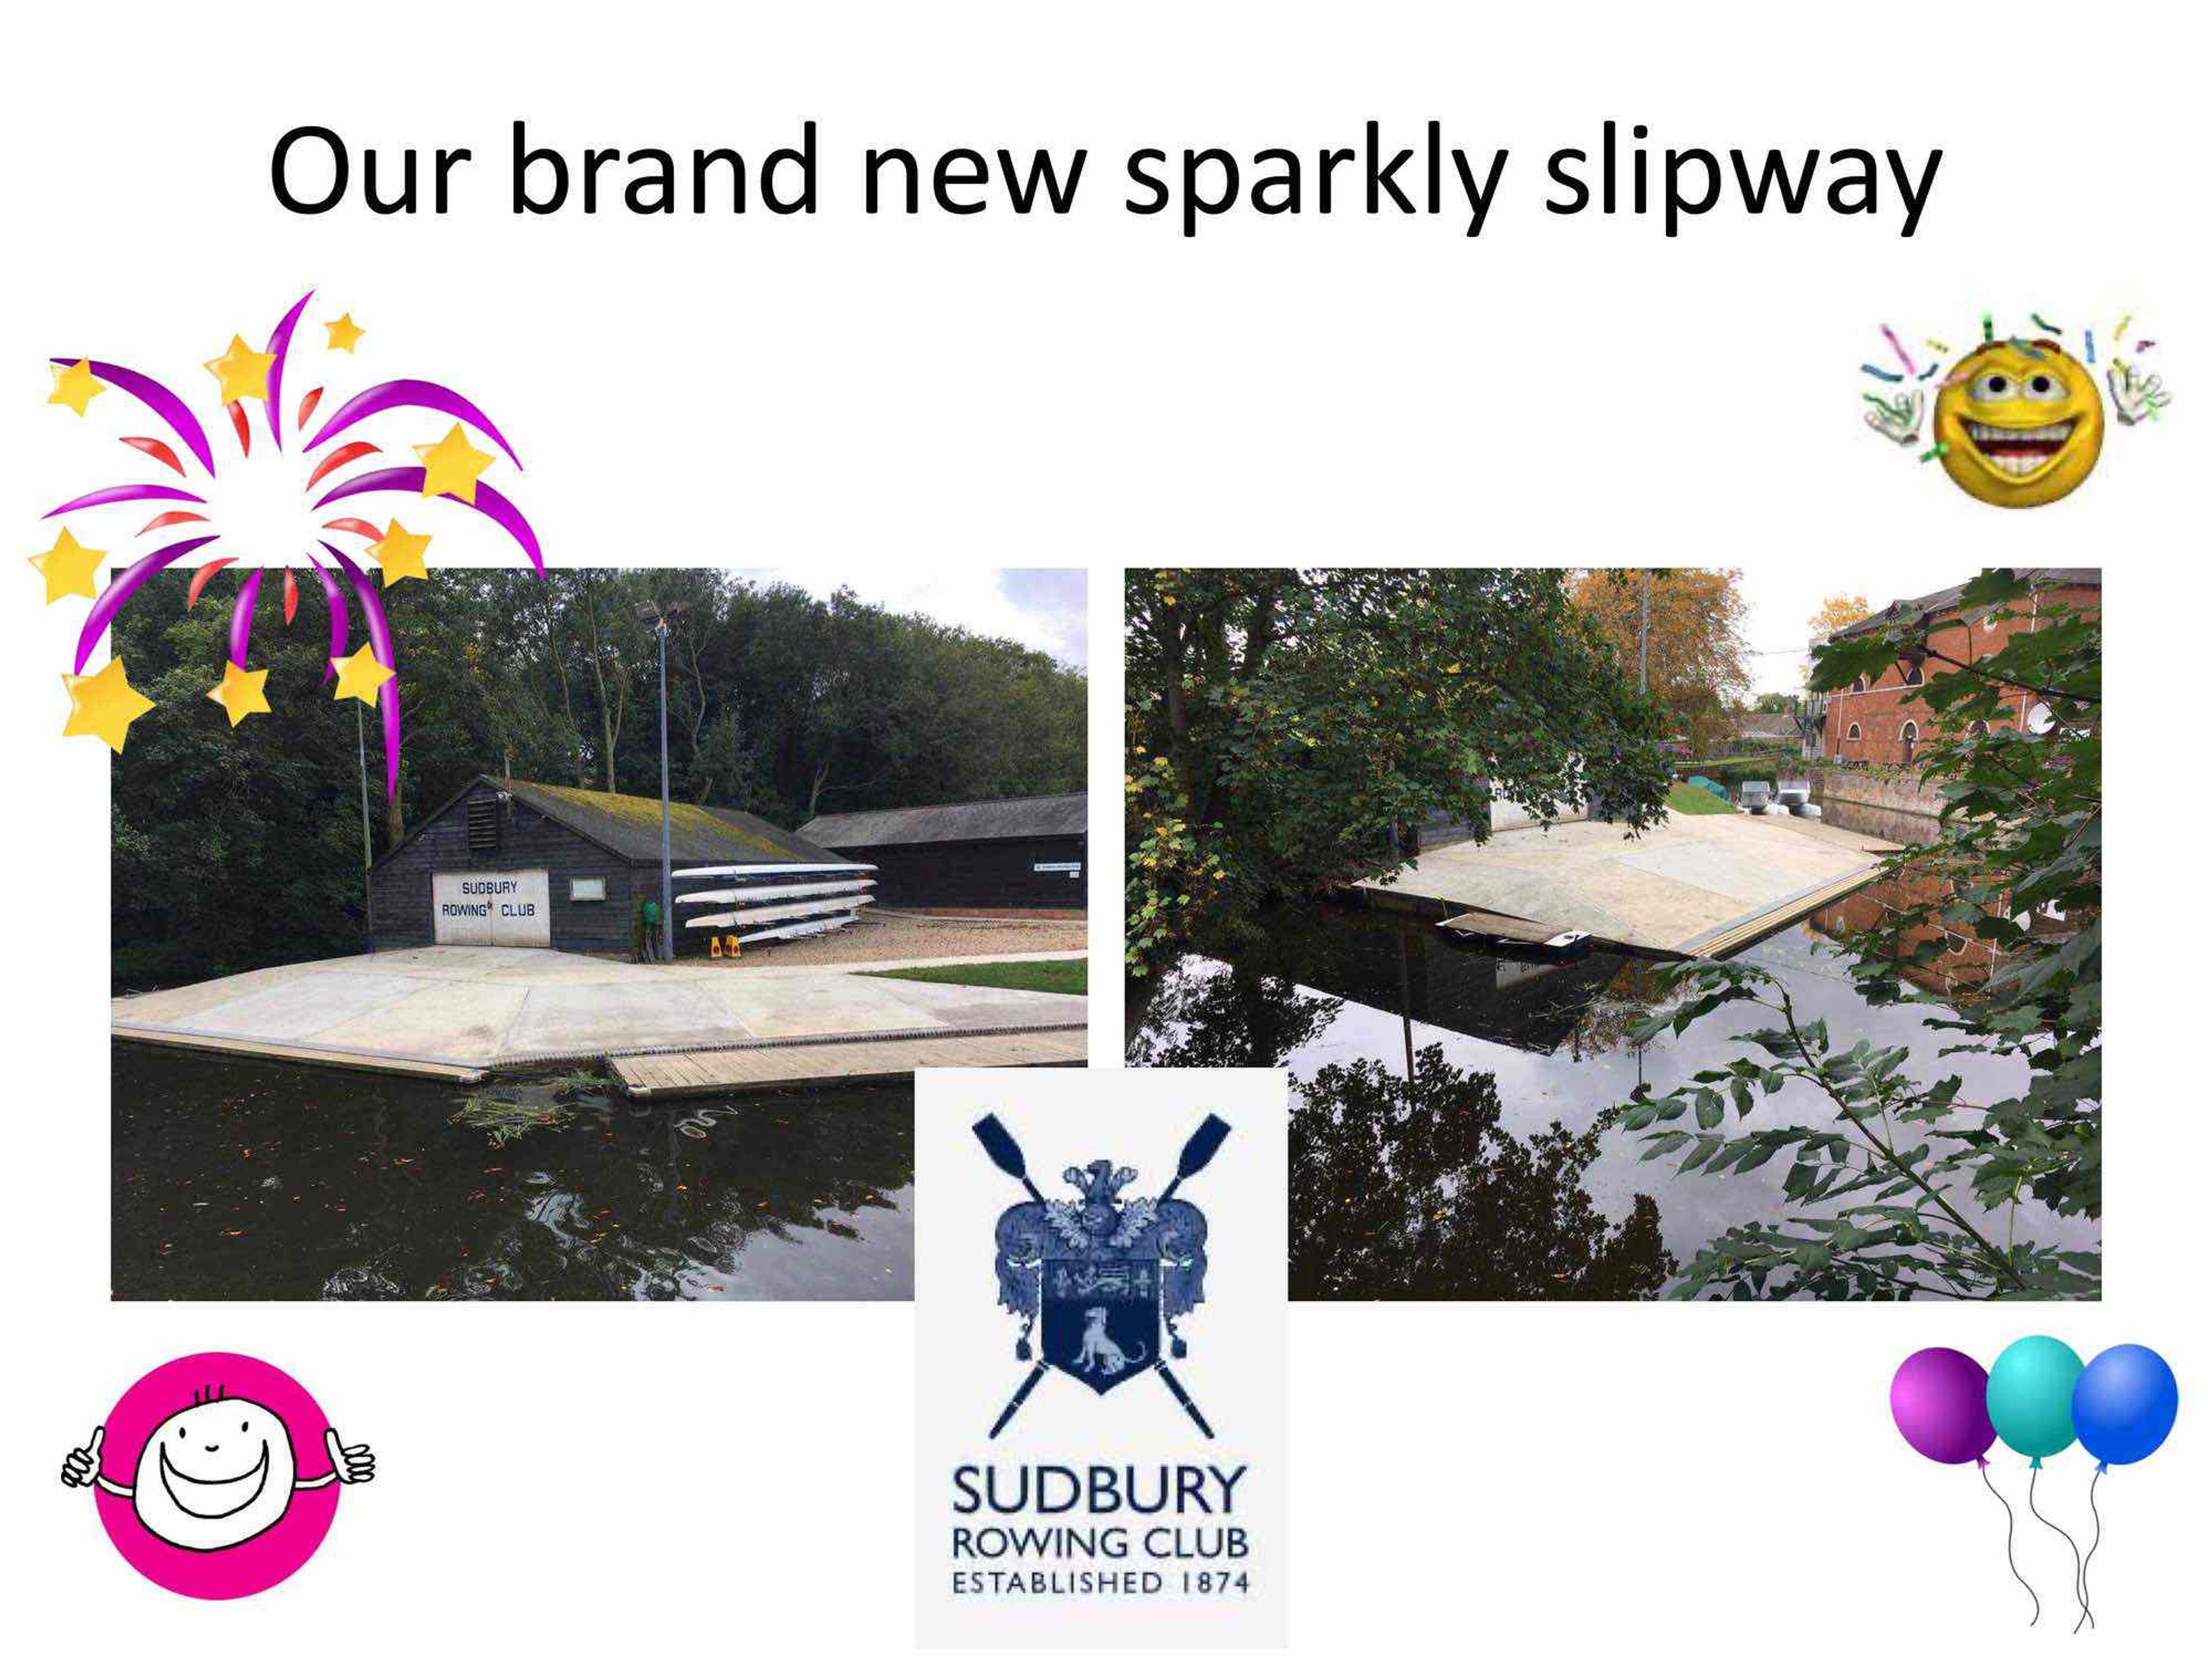 Our brand new sparkly slipway